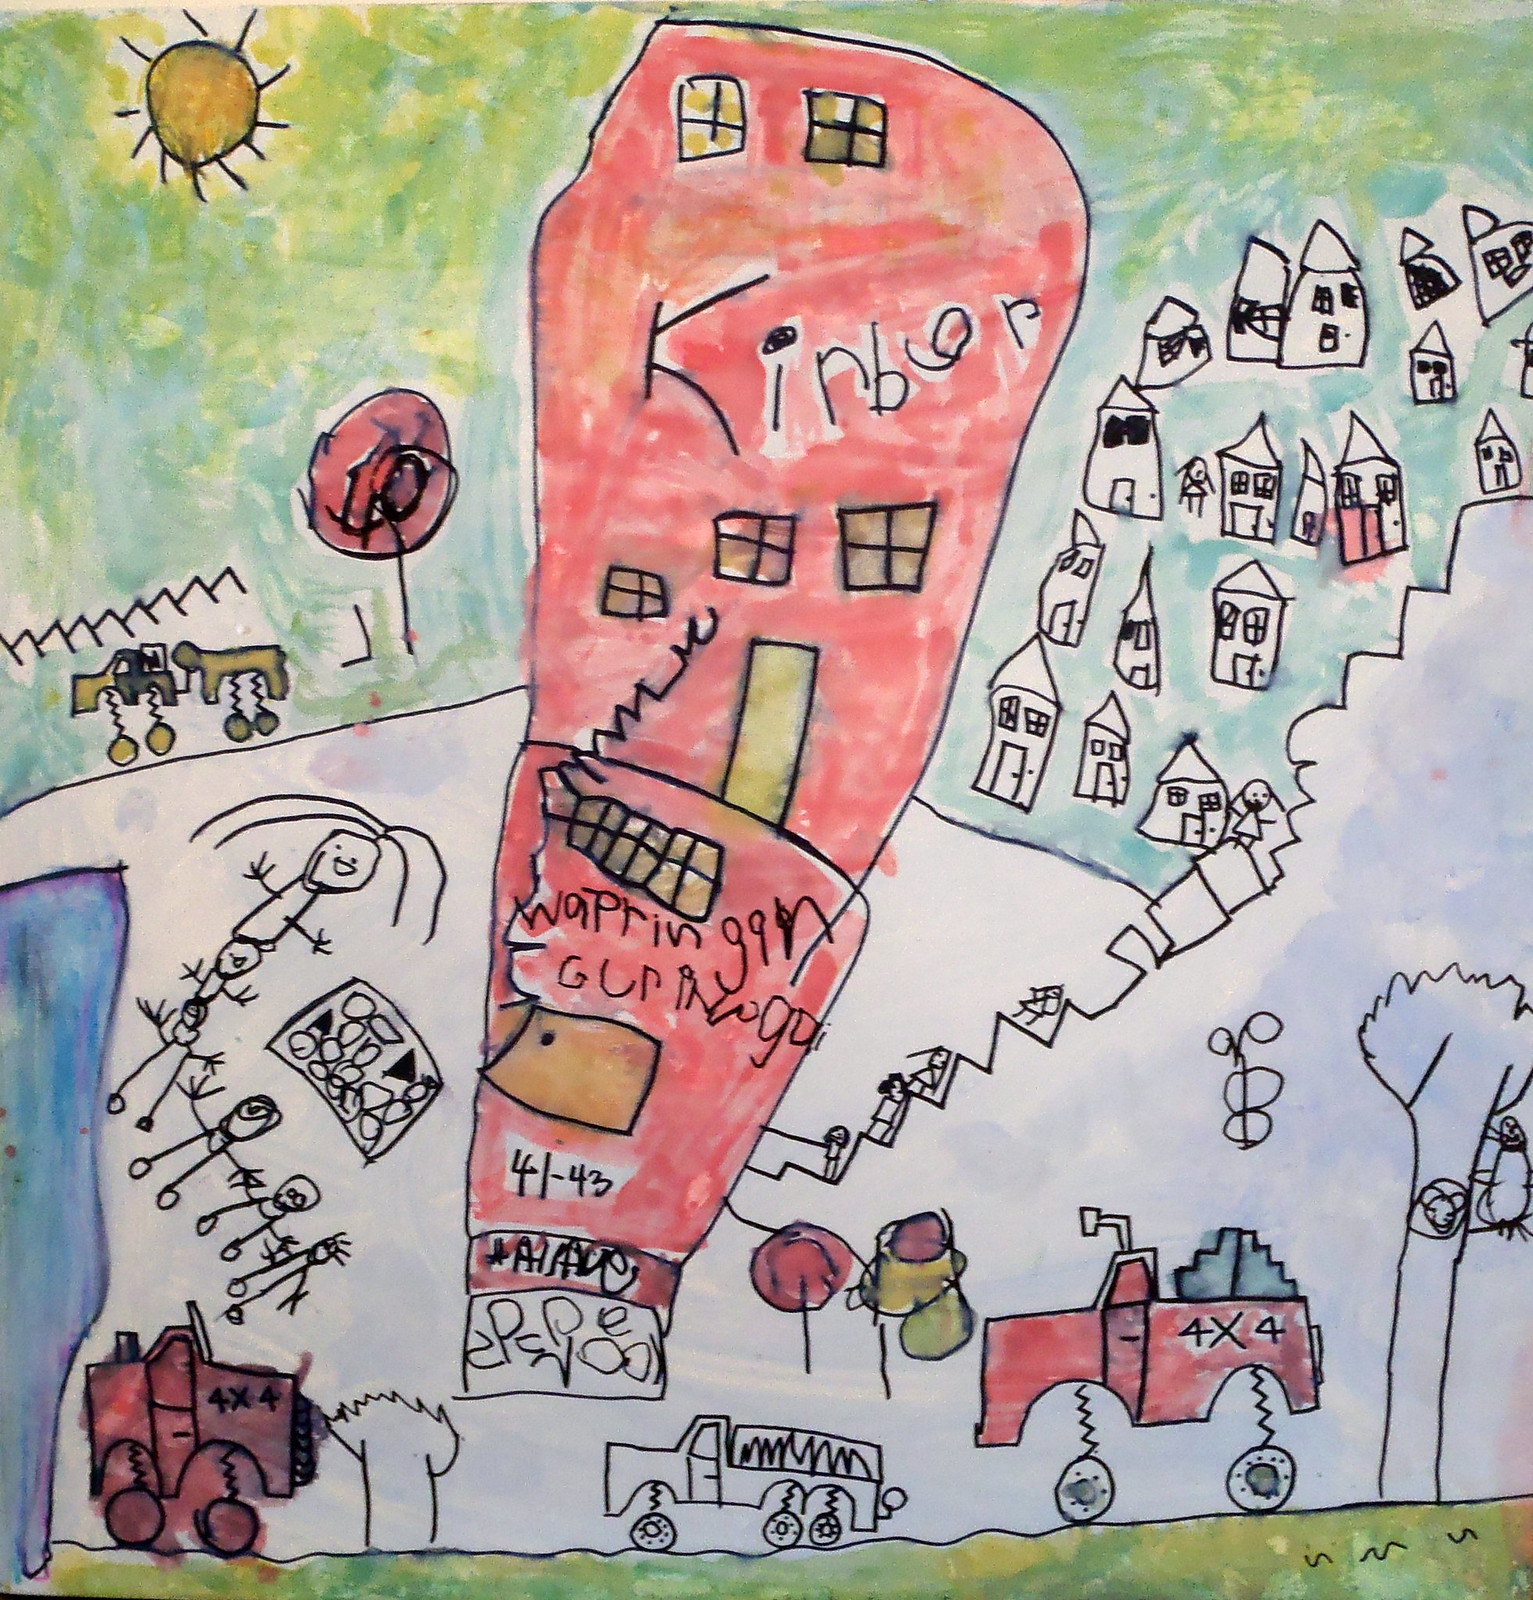 Children's perception of the community in which they live